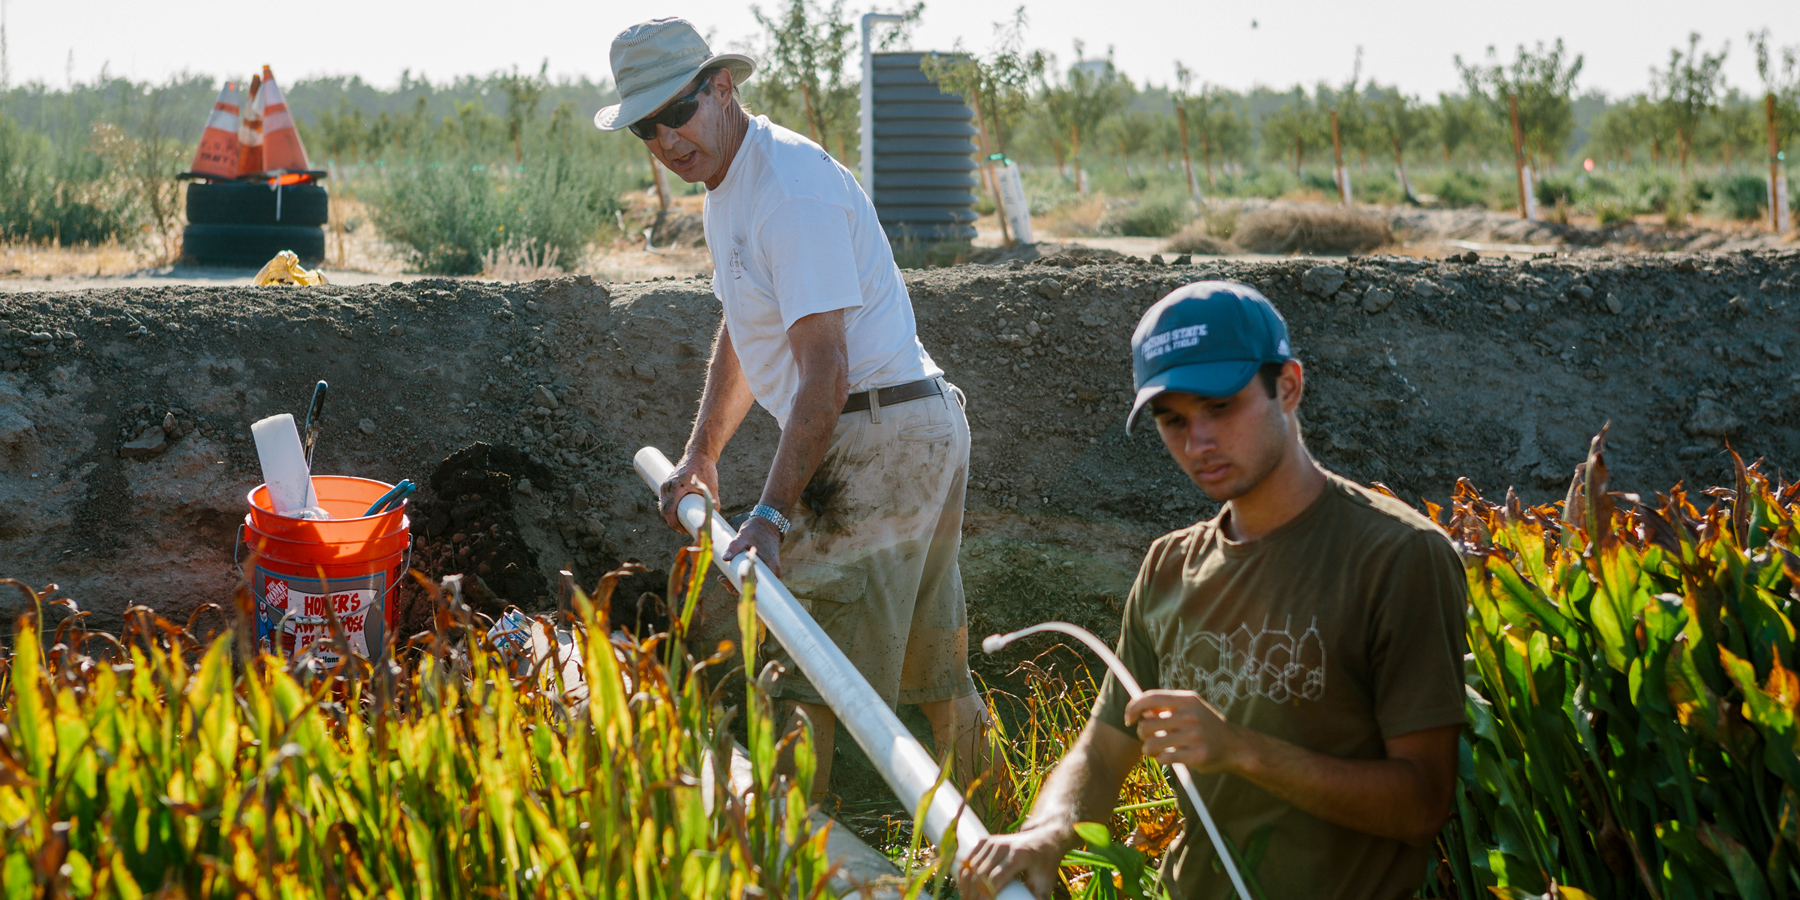 Cordie Qualle, interim director of the California Water Institute, works alongside a Fresno State student on a groundwater refr